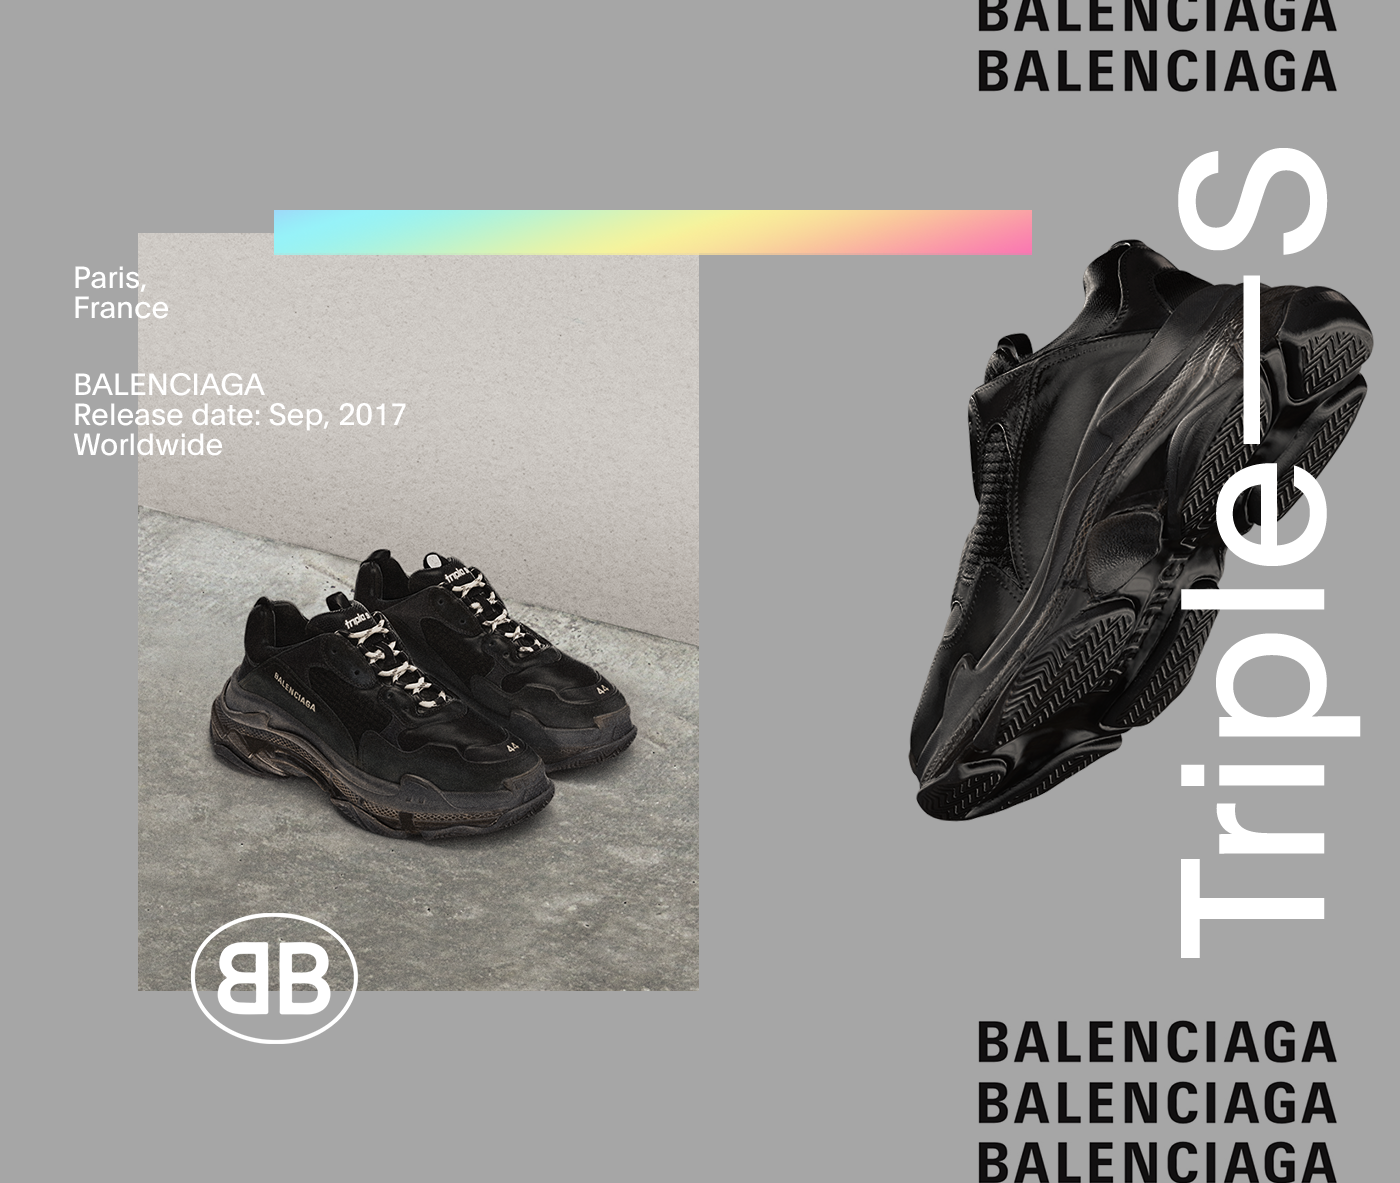 BALENCIAGA Triple-S Campaign on Behance34958f76272957.5c64bad5535be.png